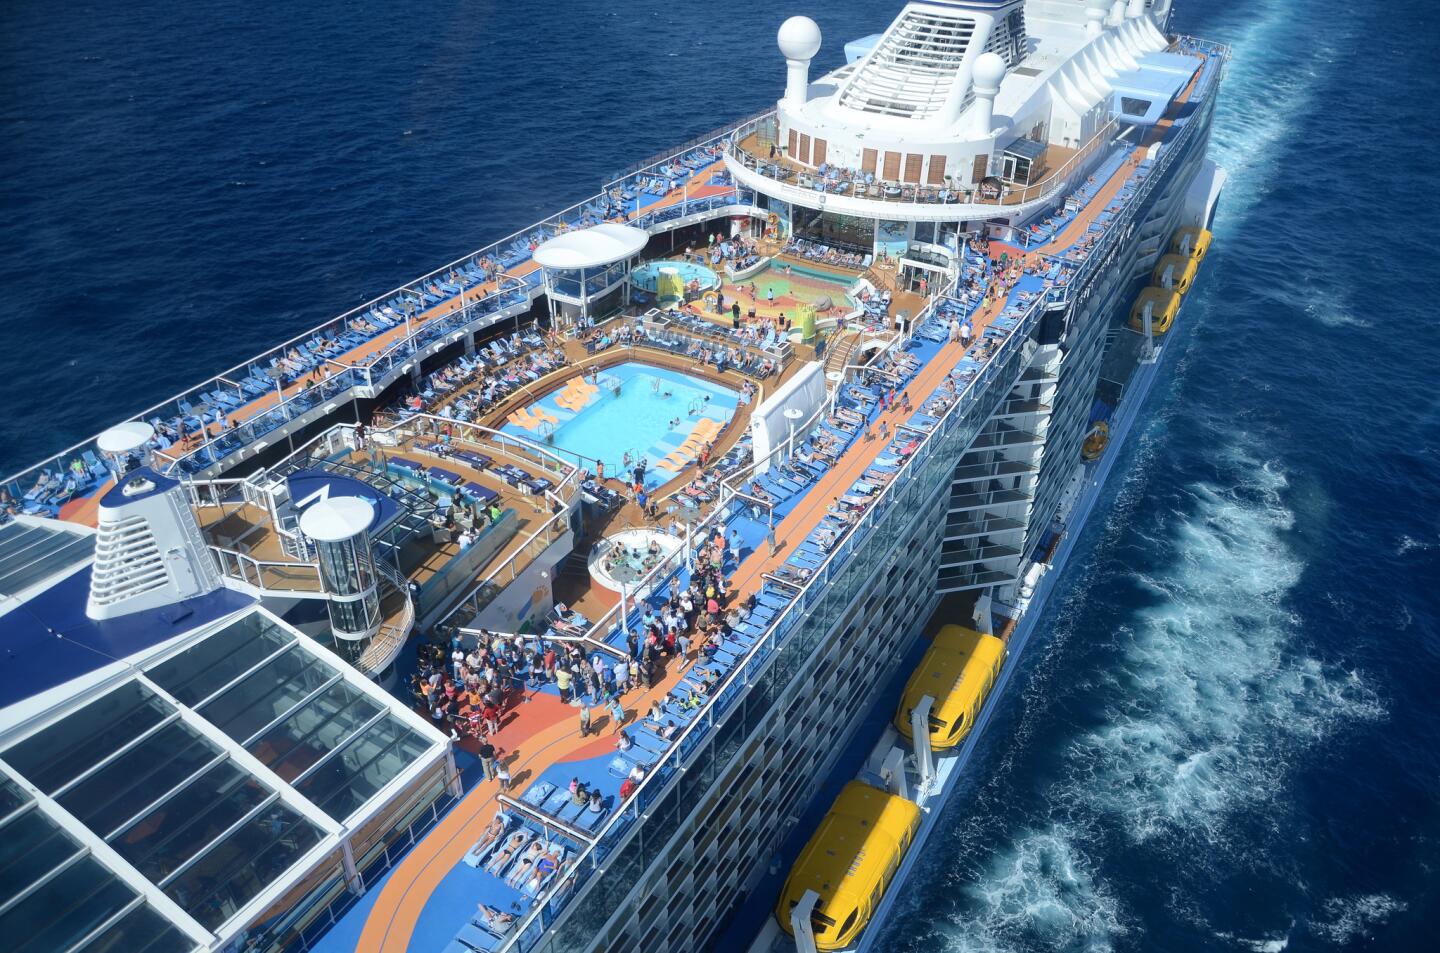 The Quantum of the Seas, seen from above. Royal Caribbean's $1-billion new cruise ship can accommodate more than 4,900 passengers and is equipped with such features as an observation pod on a crane arm.